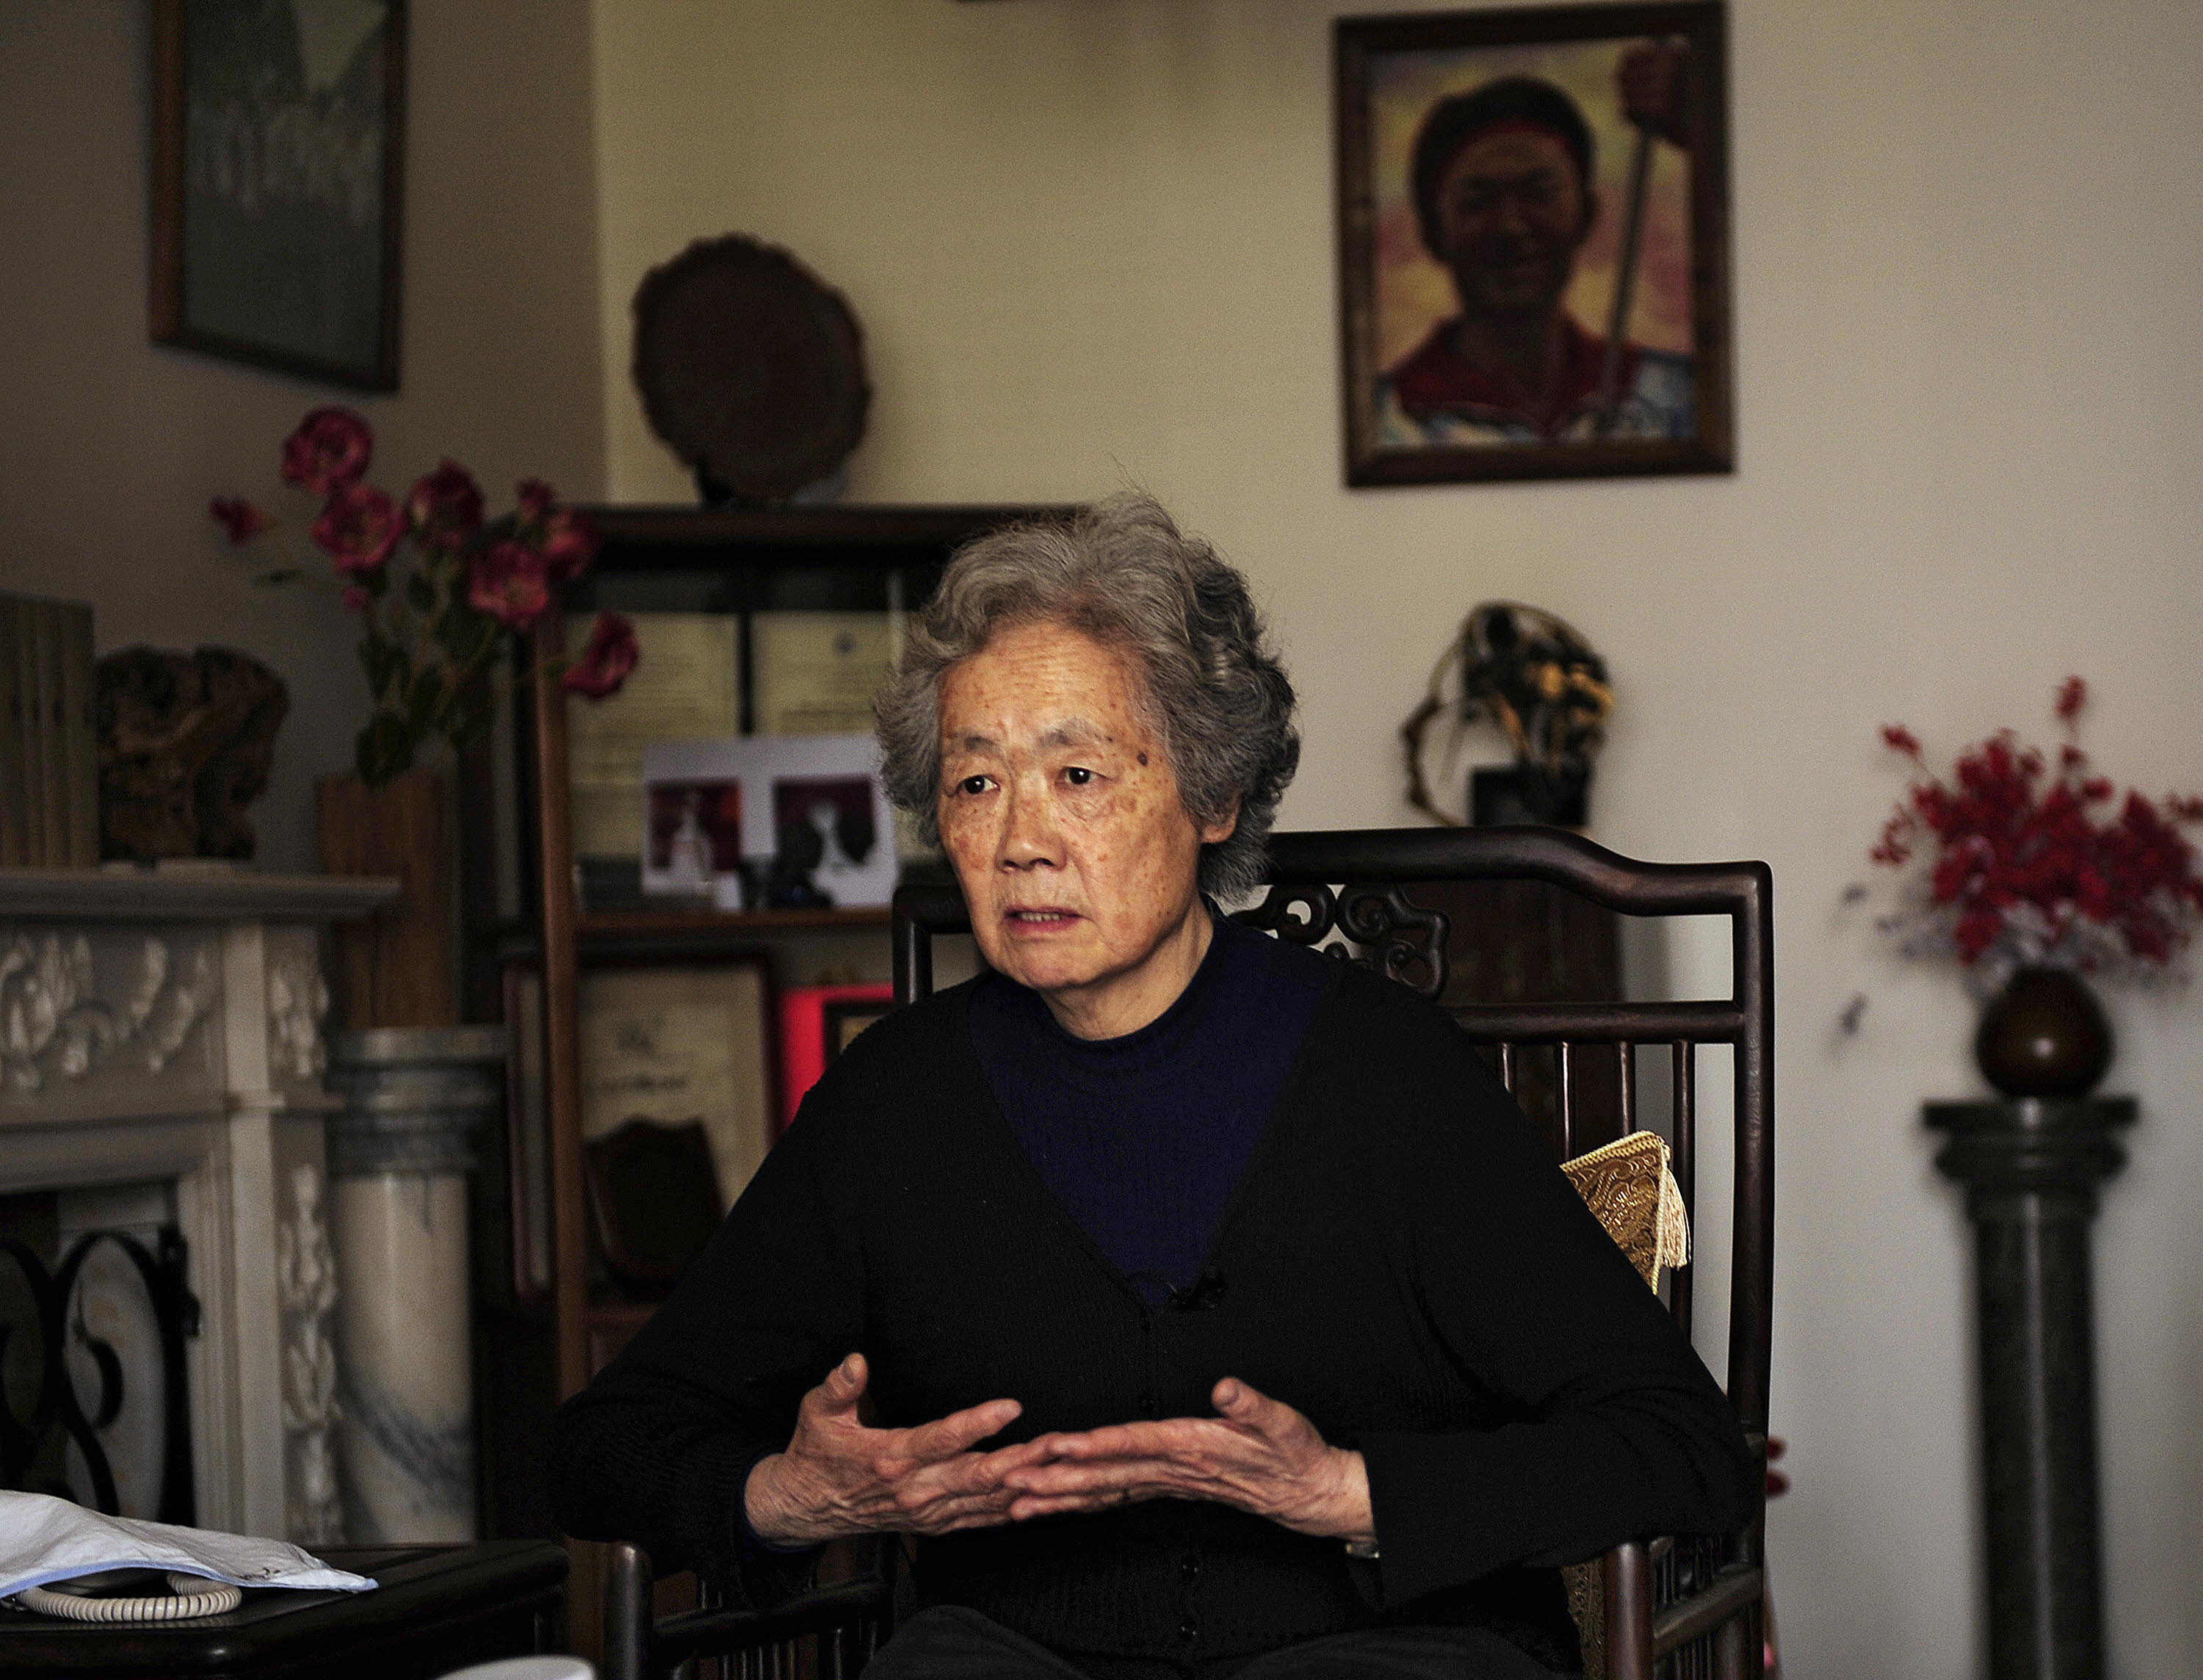 Ding Zilin, the founder of Tiananmen Mothers, was among those angered by the Deutsche Welle article. Photo: AFP